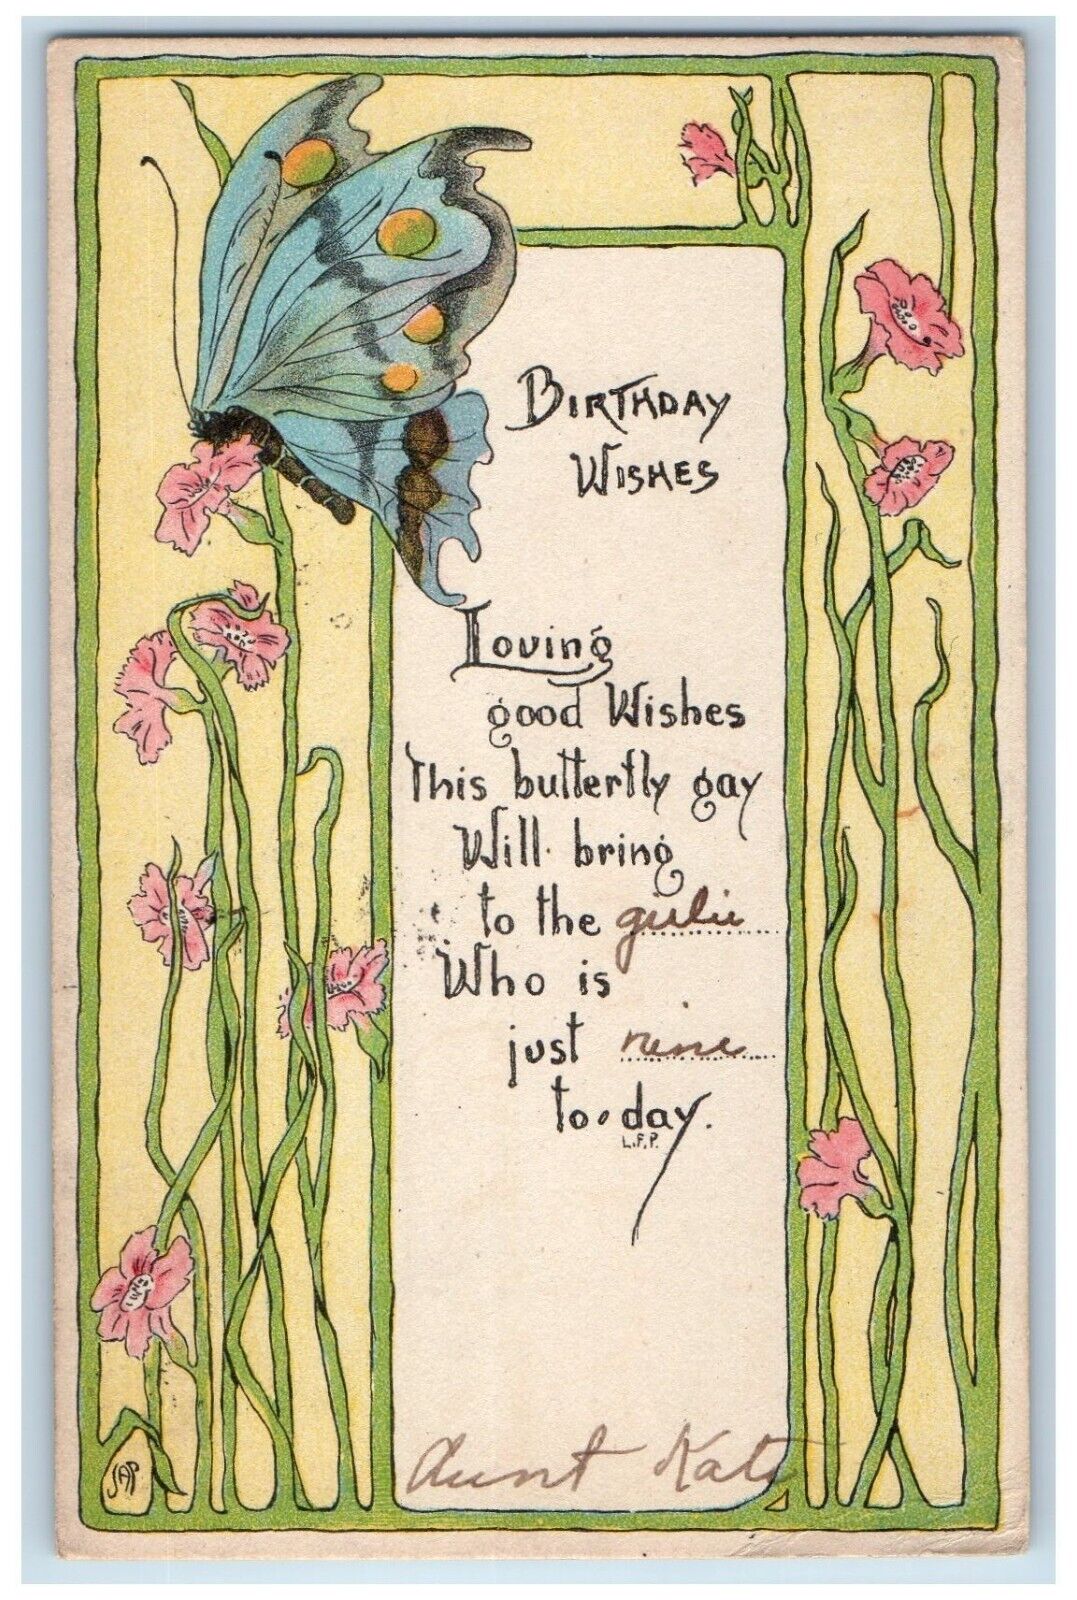 1922 Birthday Wishes Message Butterfly Flowers Arts Crafts Antique Postcard